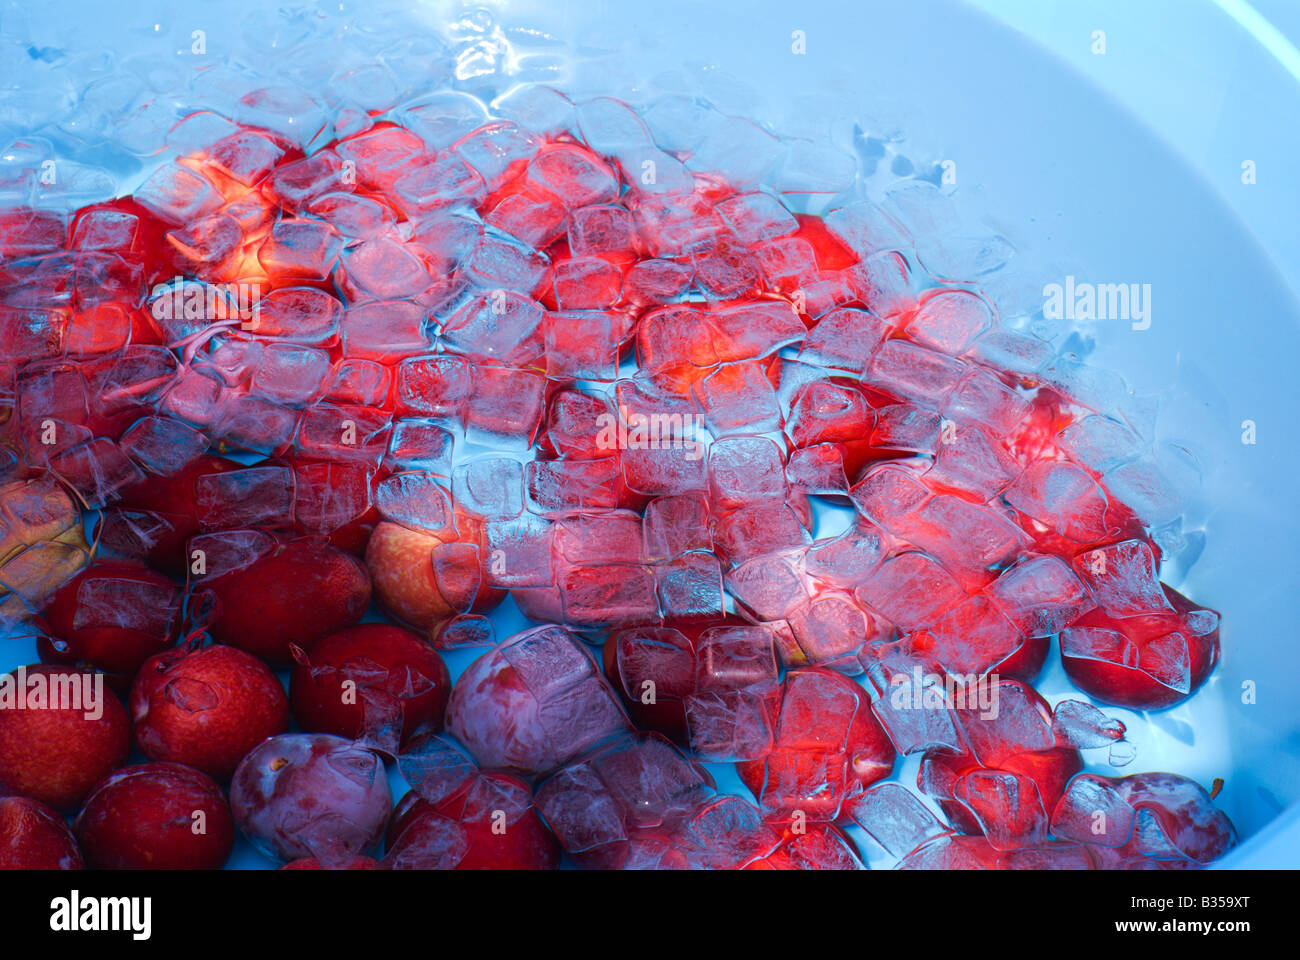 Chilled fruits and vegetables are popular summer snacks in Japan. Sweet purple plums are displayed in a blue tub of ice water. Stock Photo